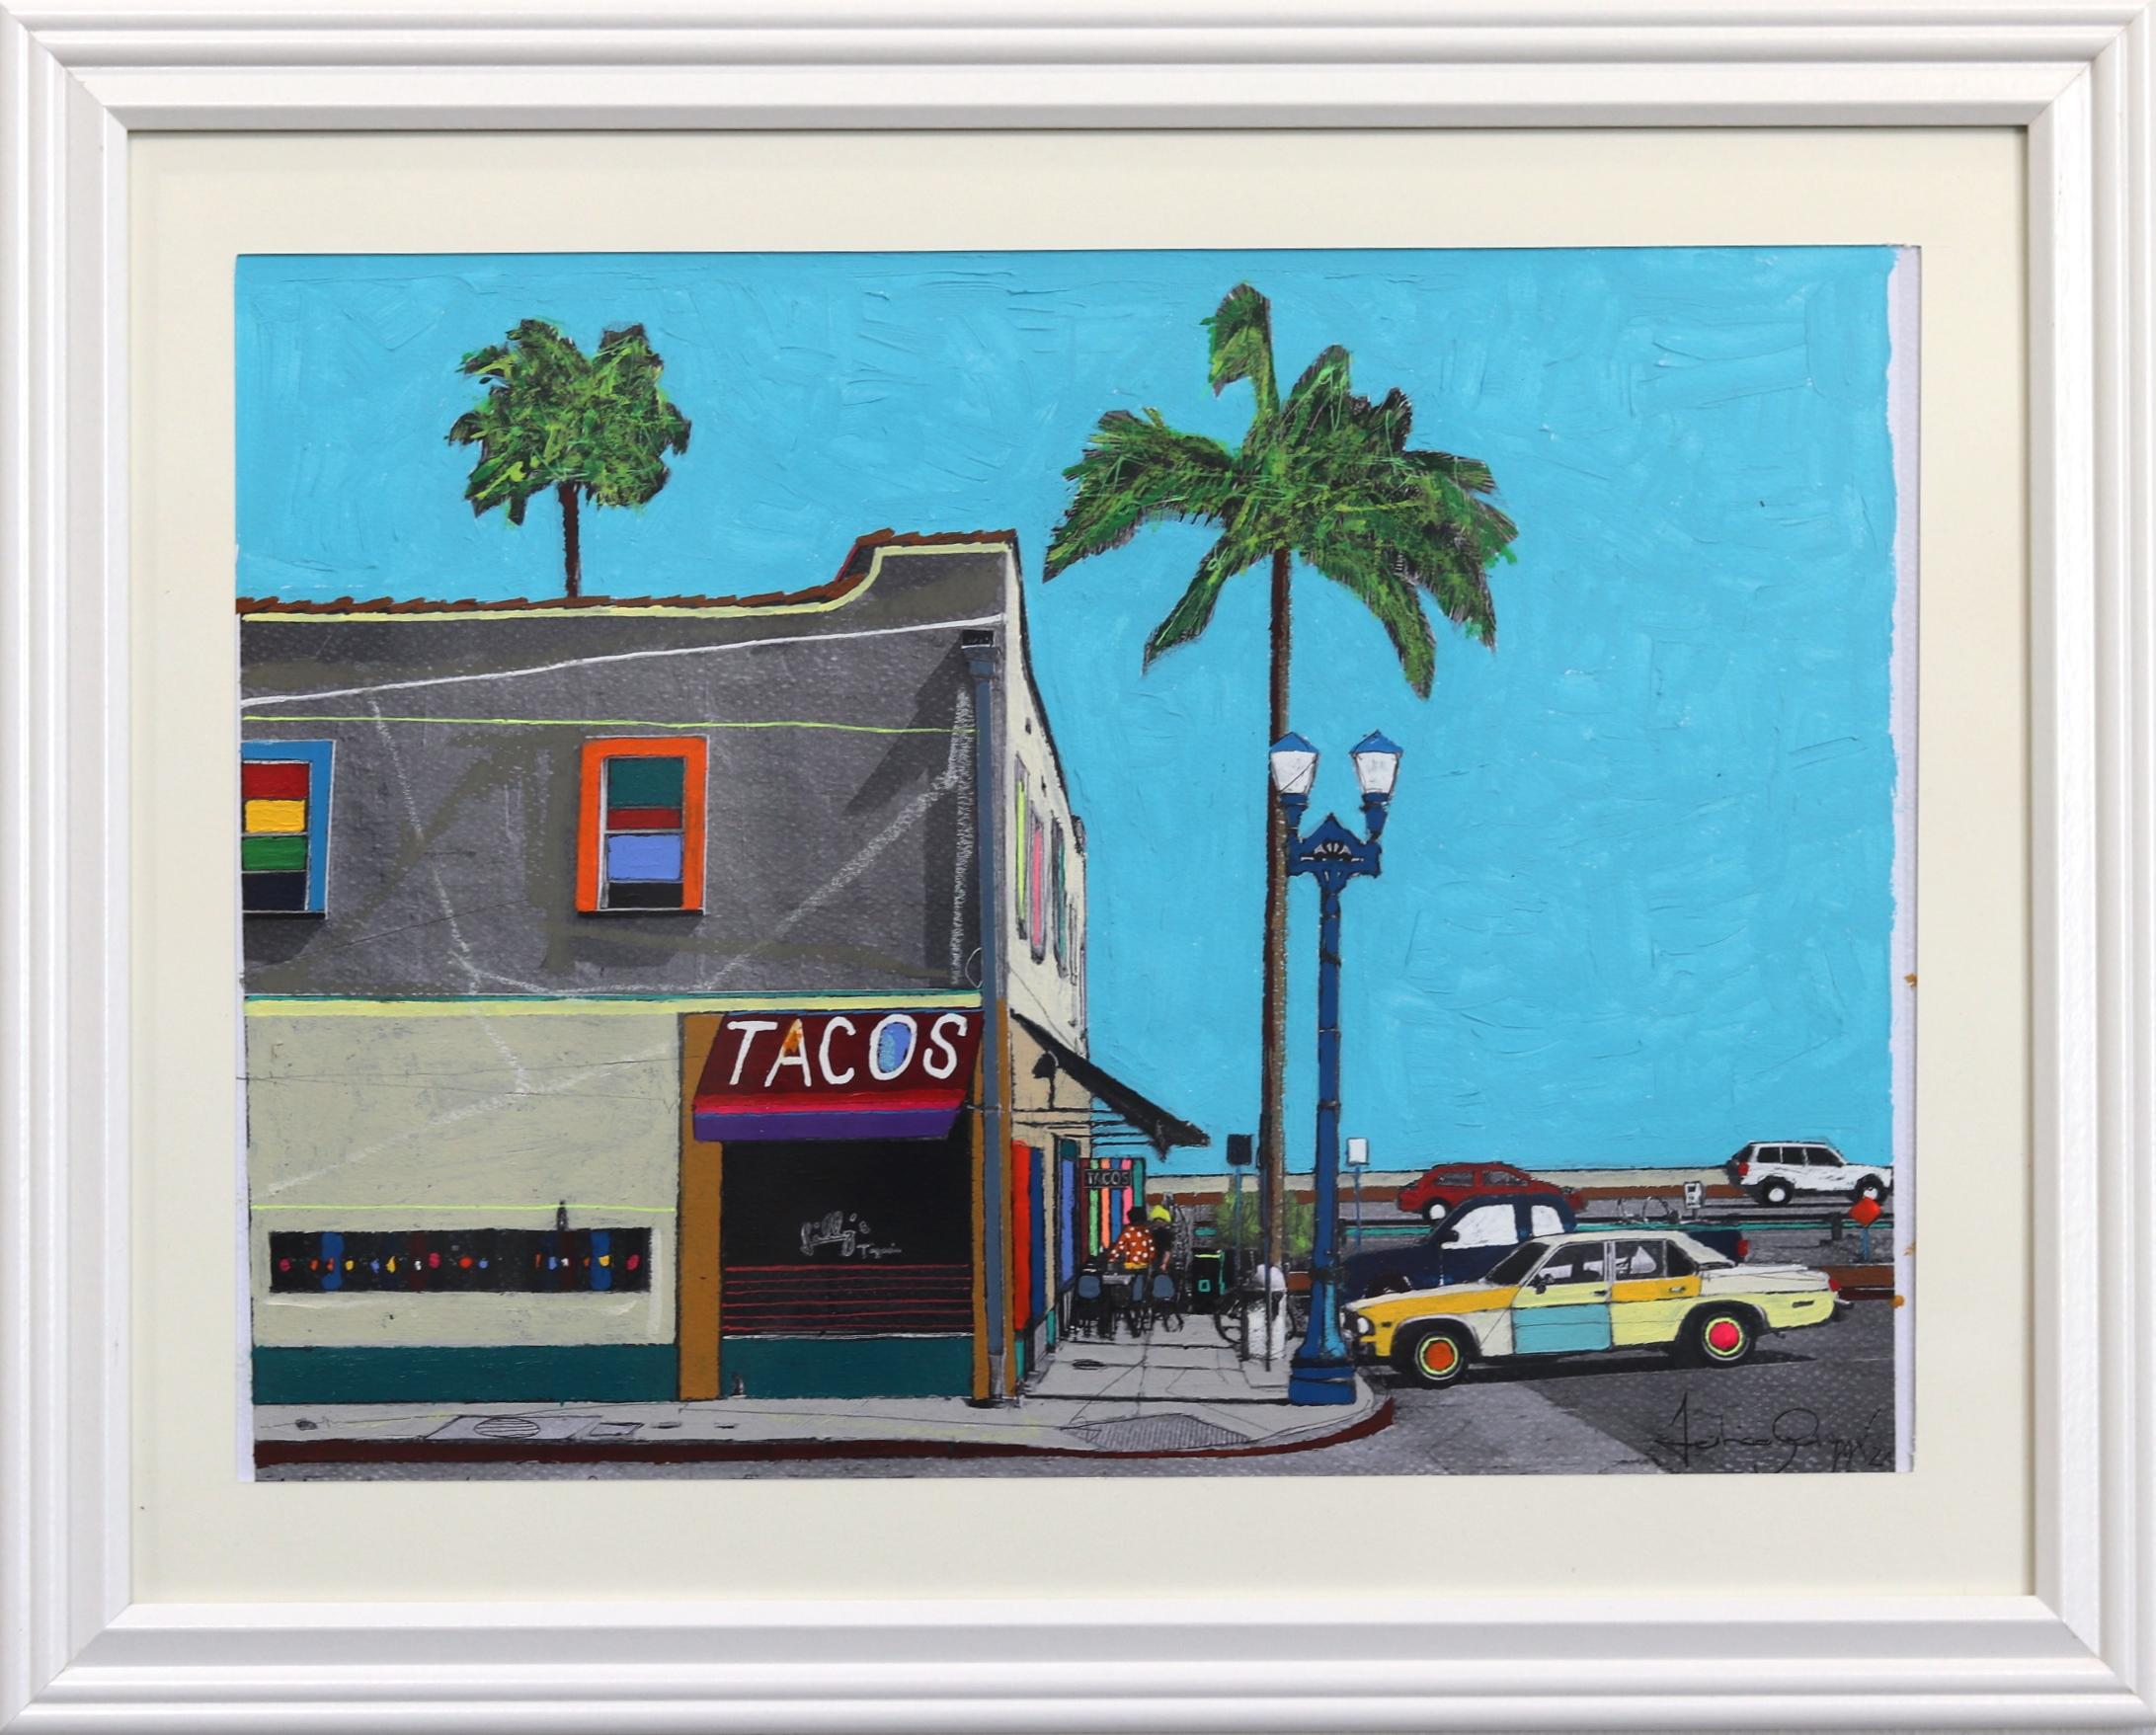 Lazy Sunday Afternoon in Santa Barbara #8 - Colorful Authentic Environment Art